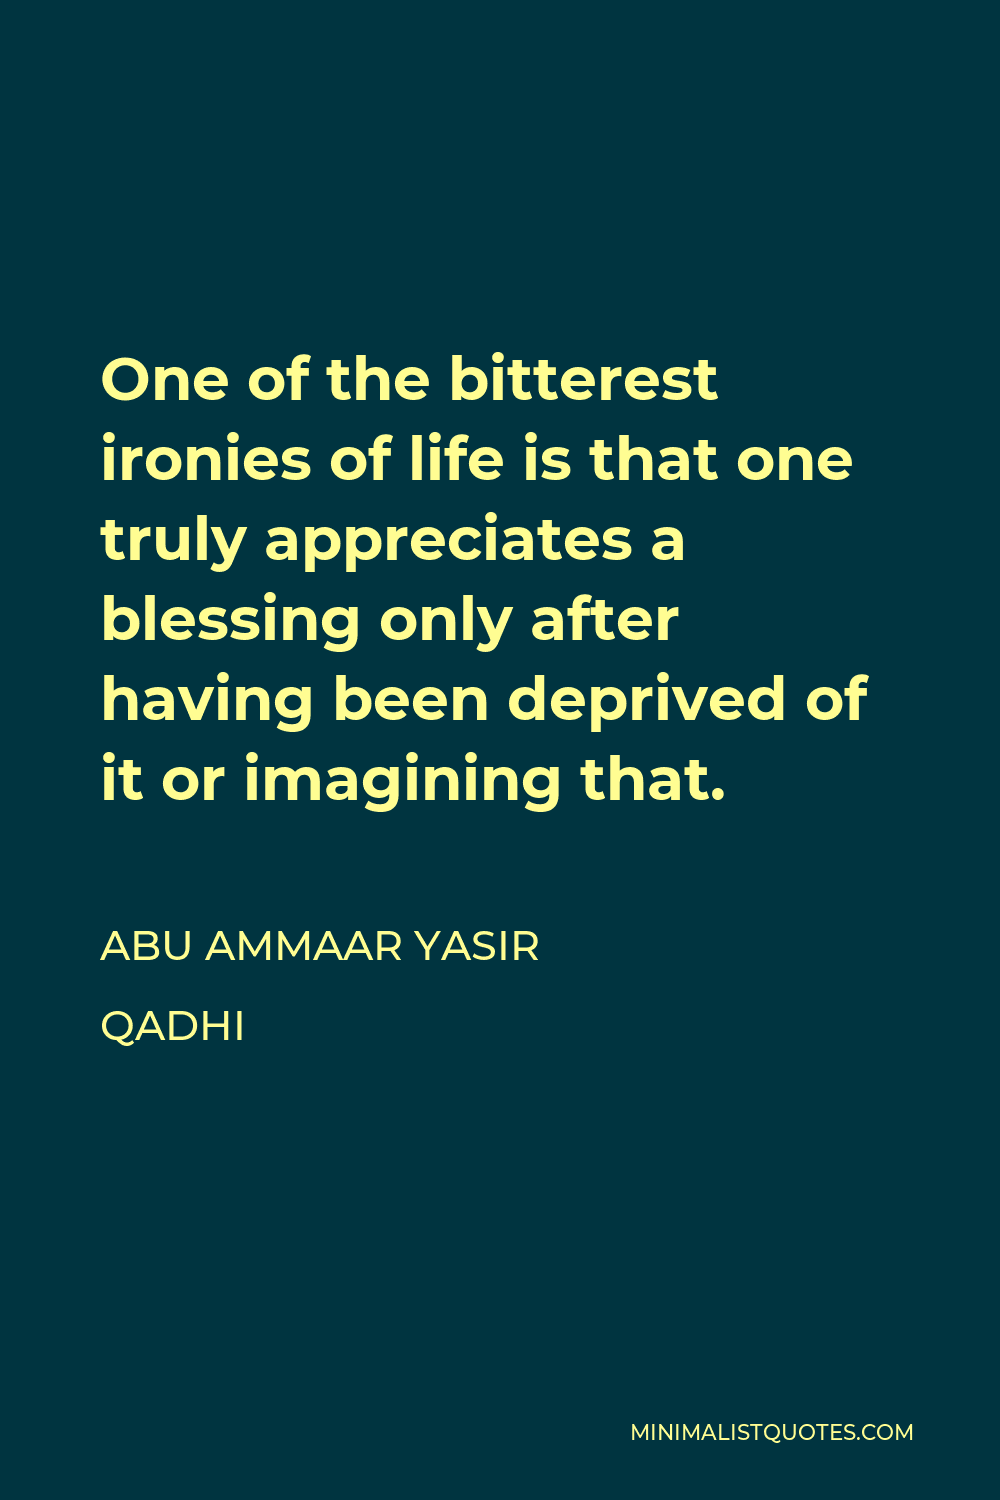 Abu Ammaar Yasir Qadhi Quote - One of the bitterest ironies of life is that one truly appreciates a blessing only after having been deprived of it or imagining that.